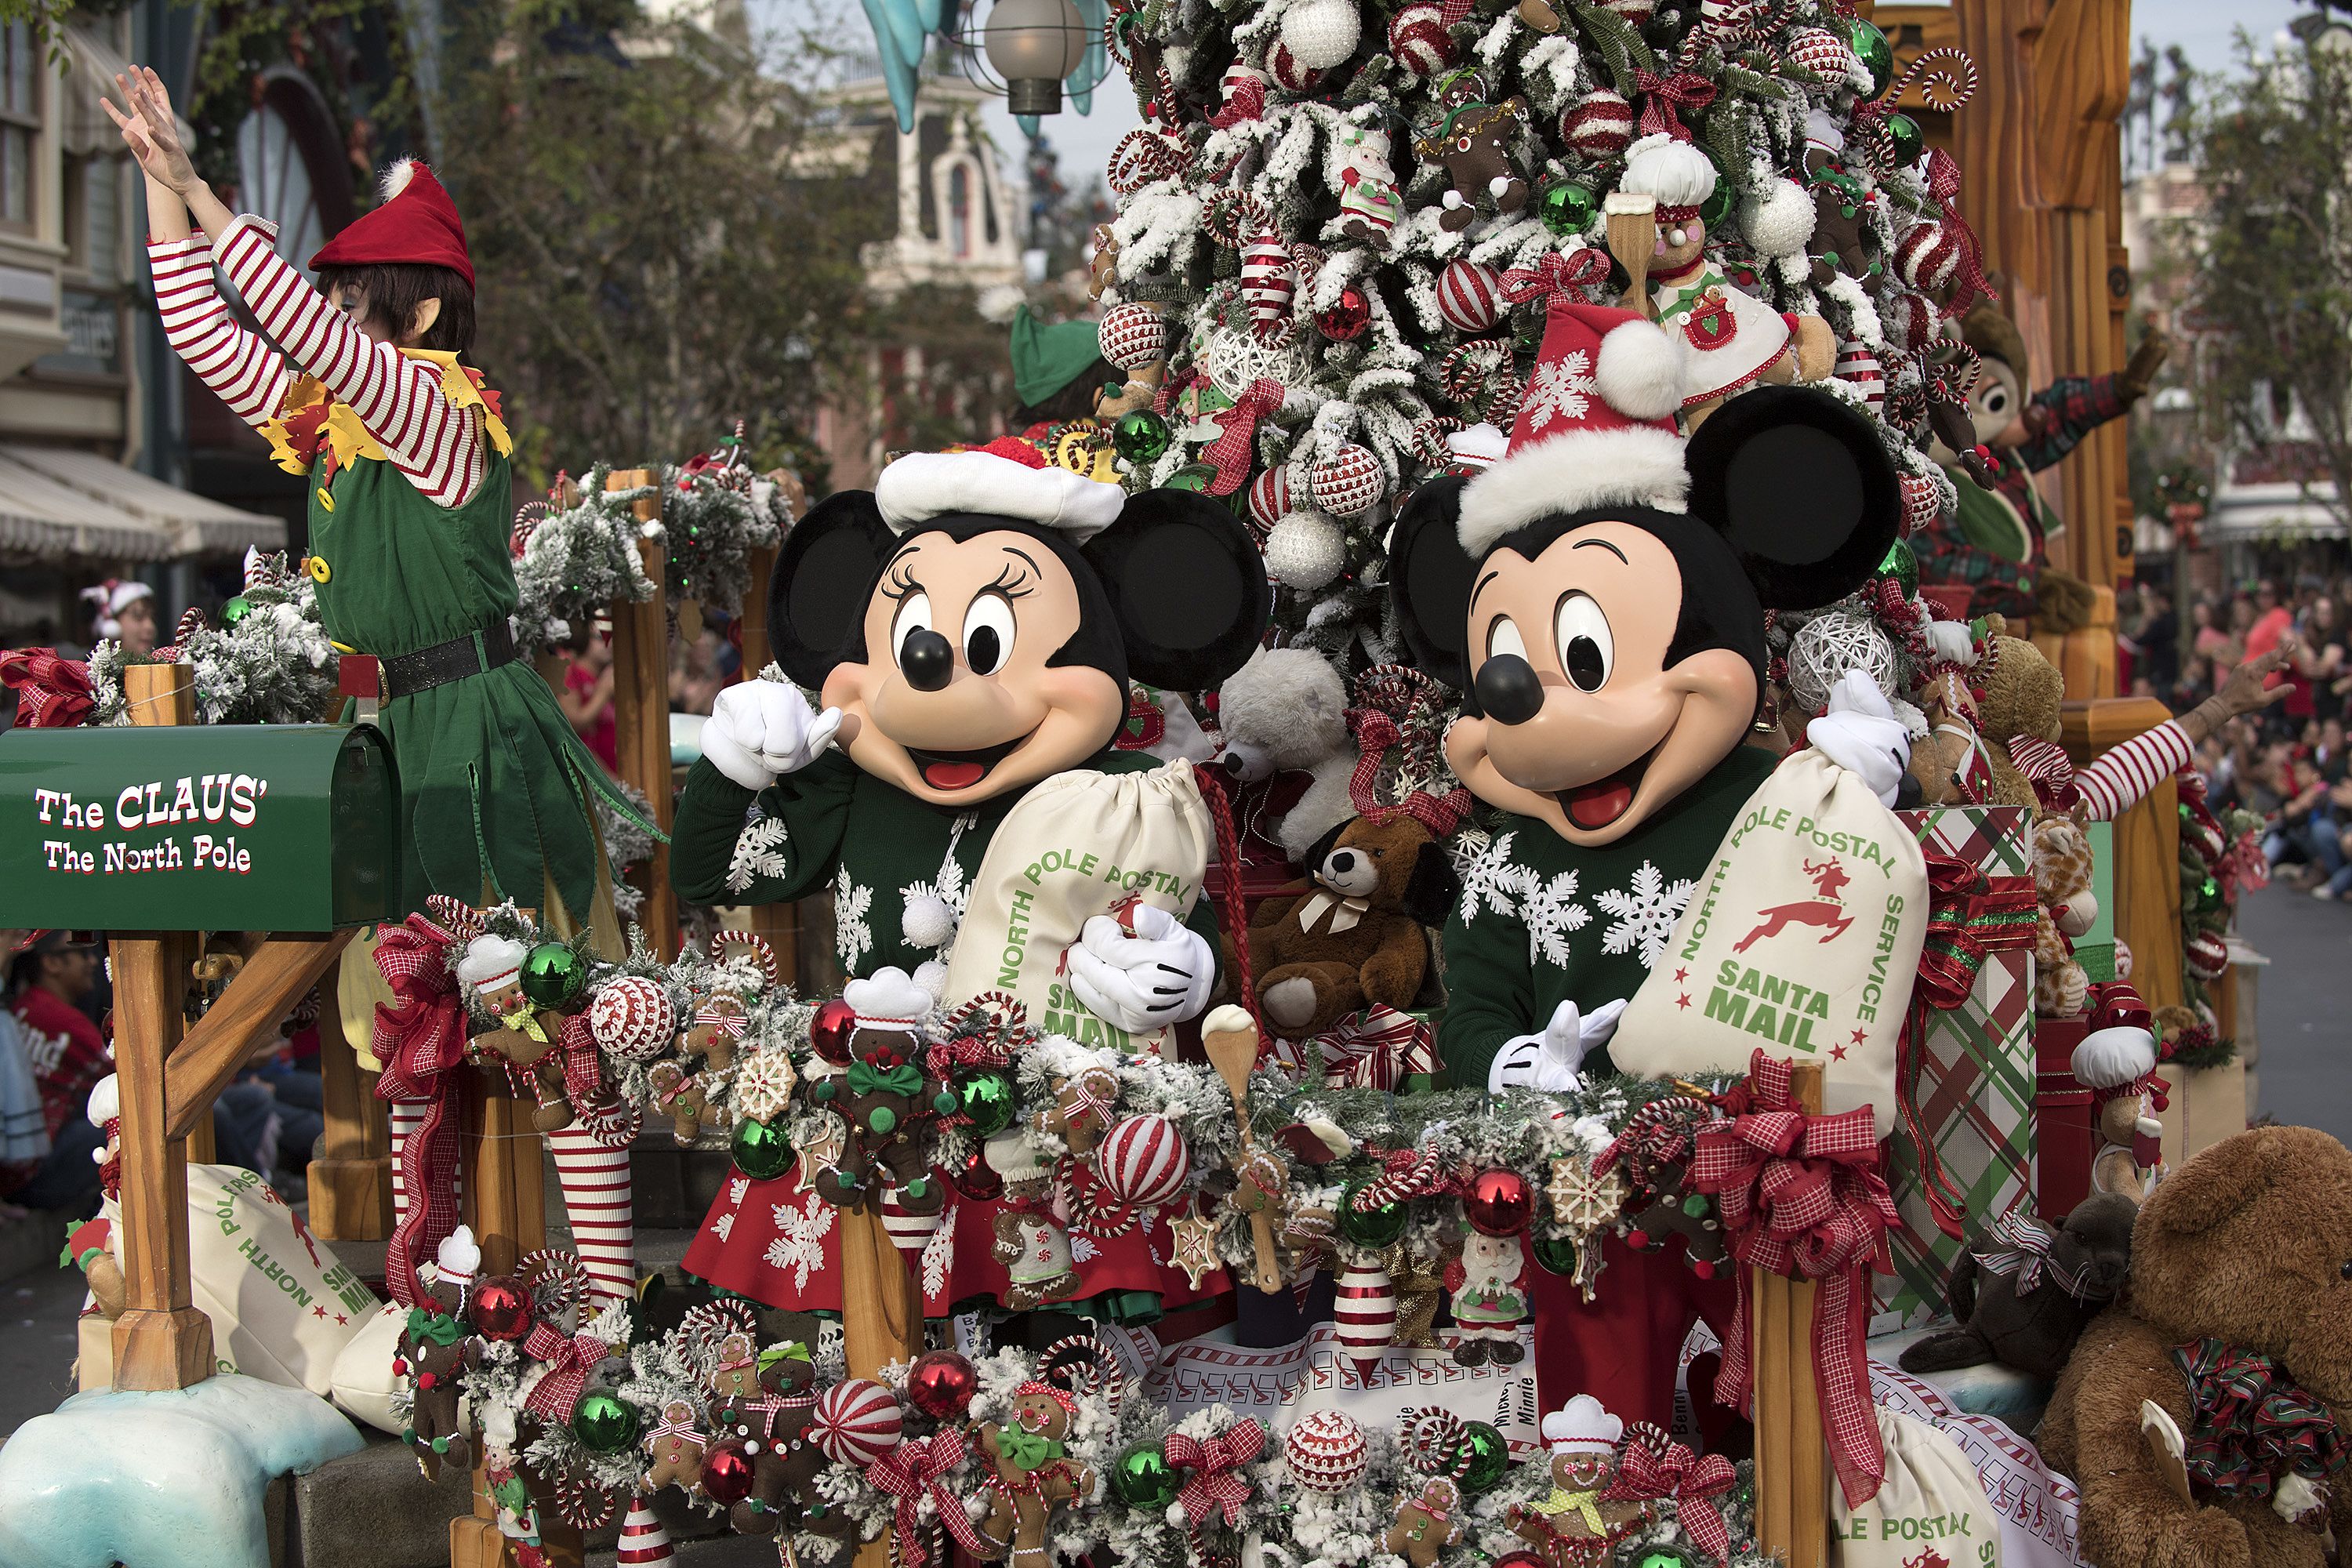 How to watch the 2017 Disney Parks Magical Christmas Celebration on ABC